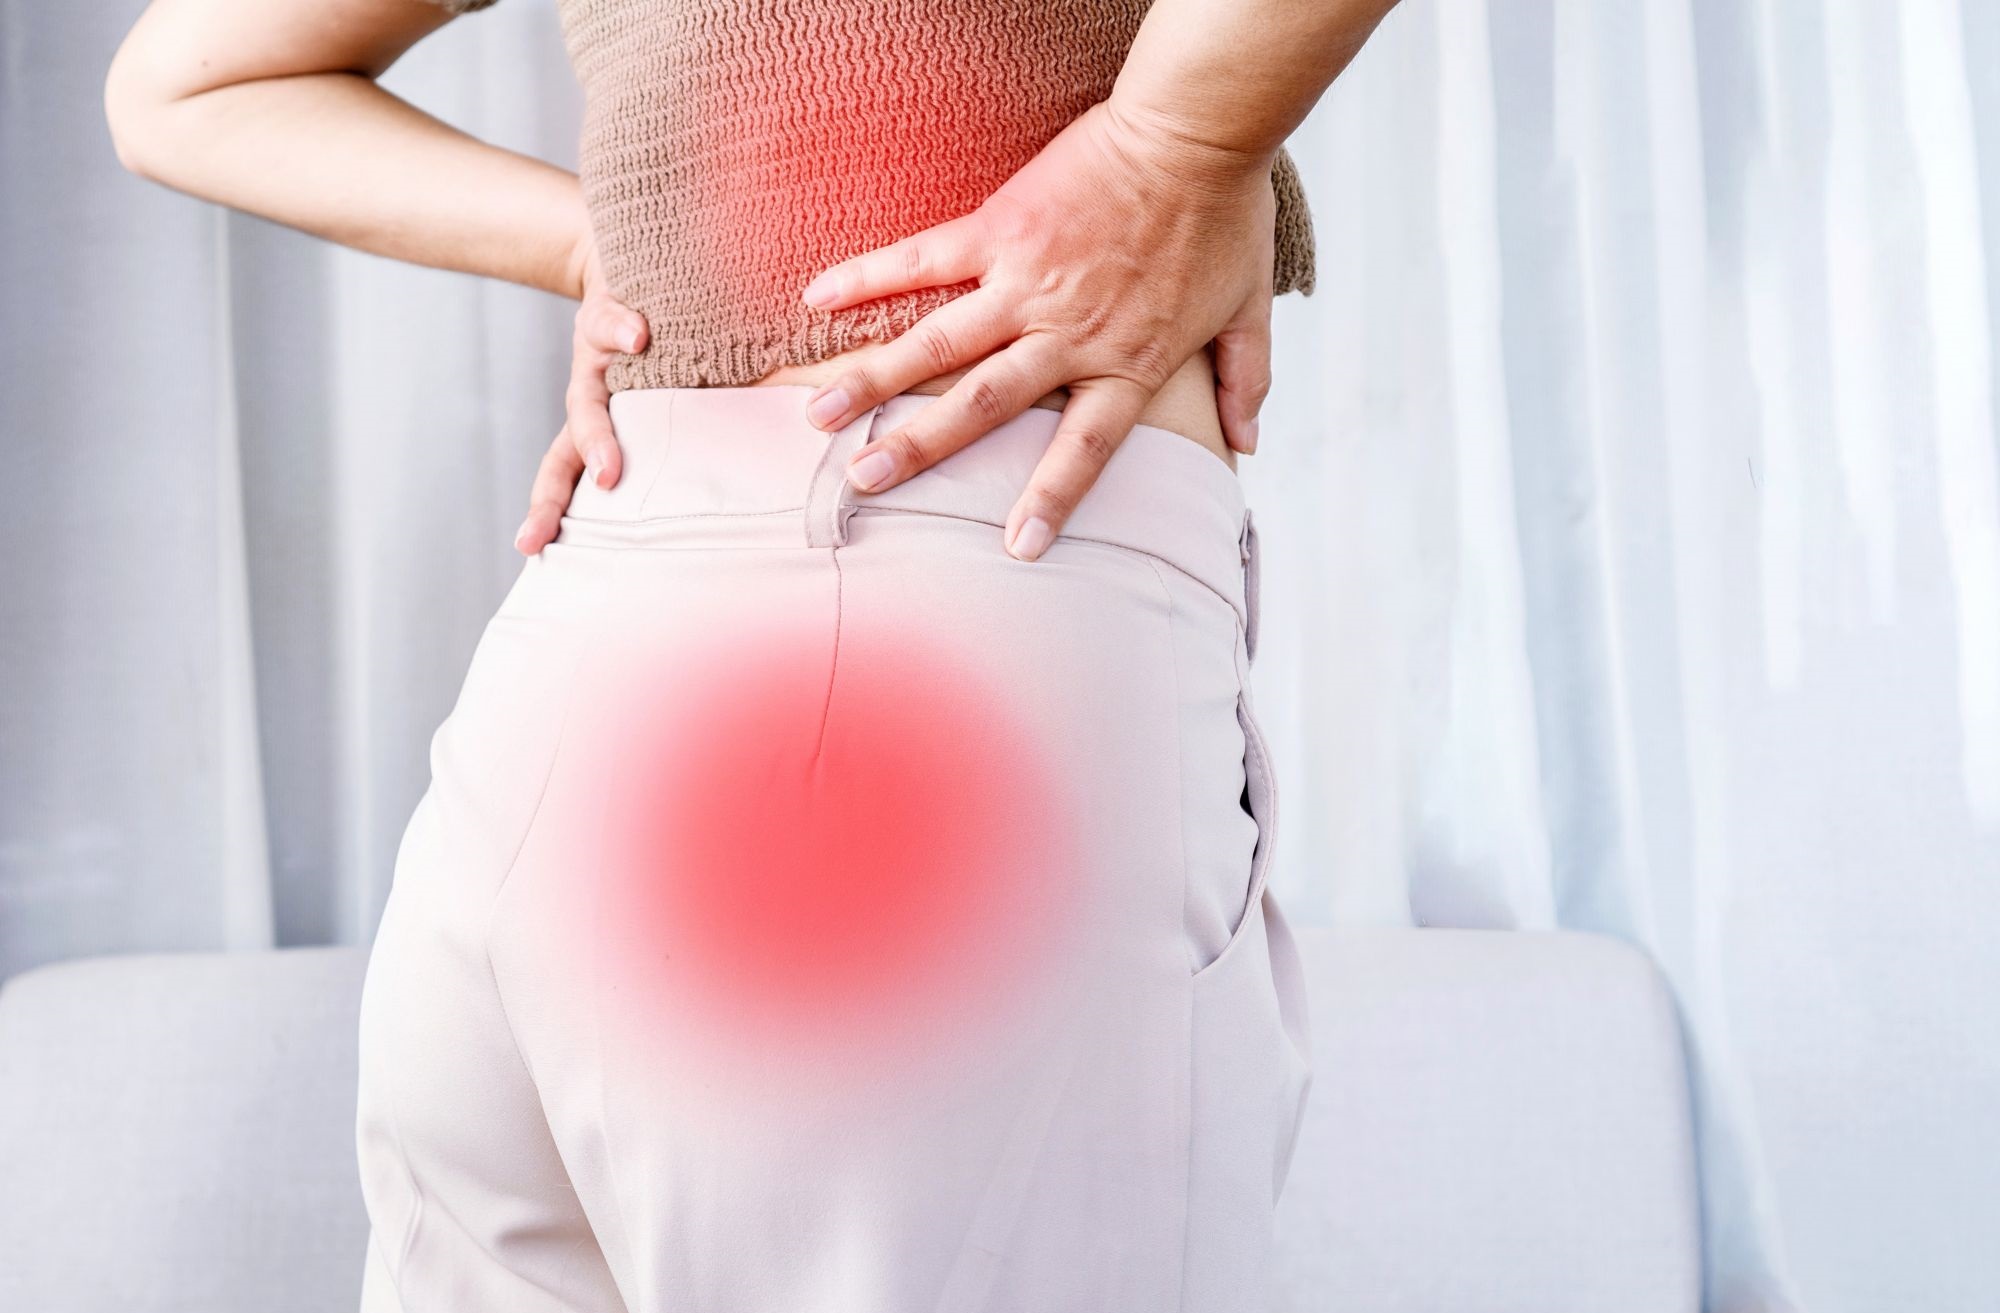 3 natural remedies for immediate relief for sciatica pain from the back pain experts in lake country